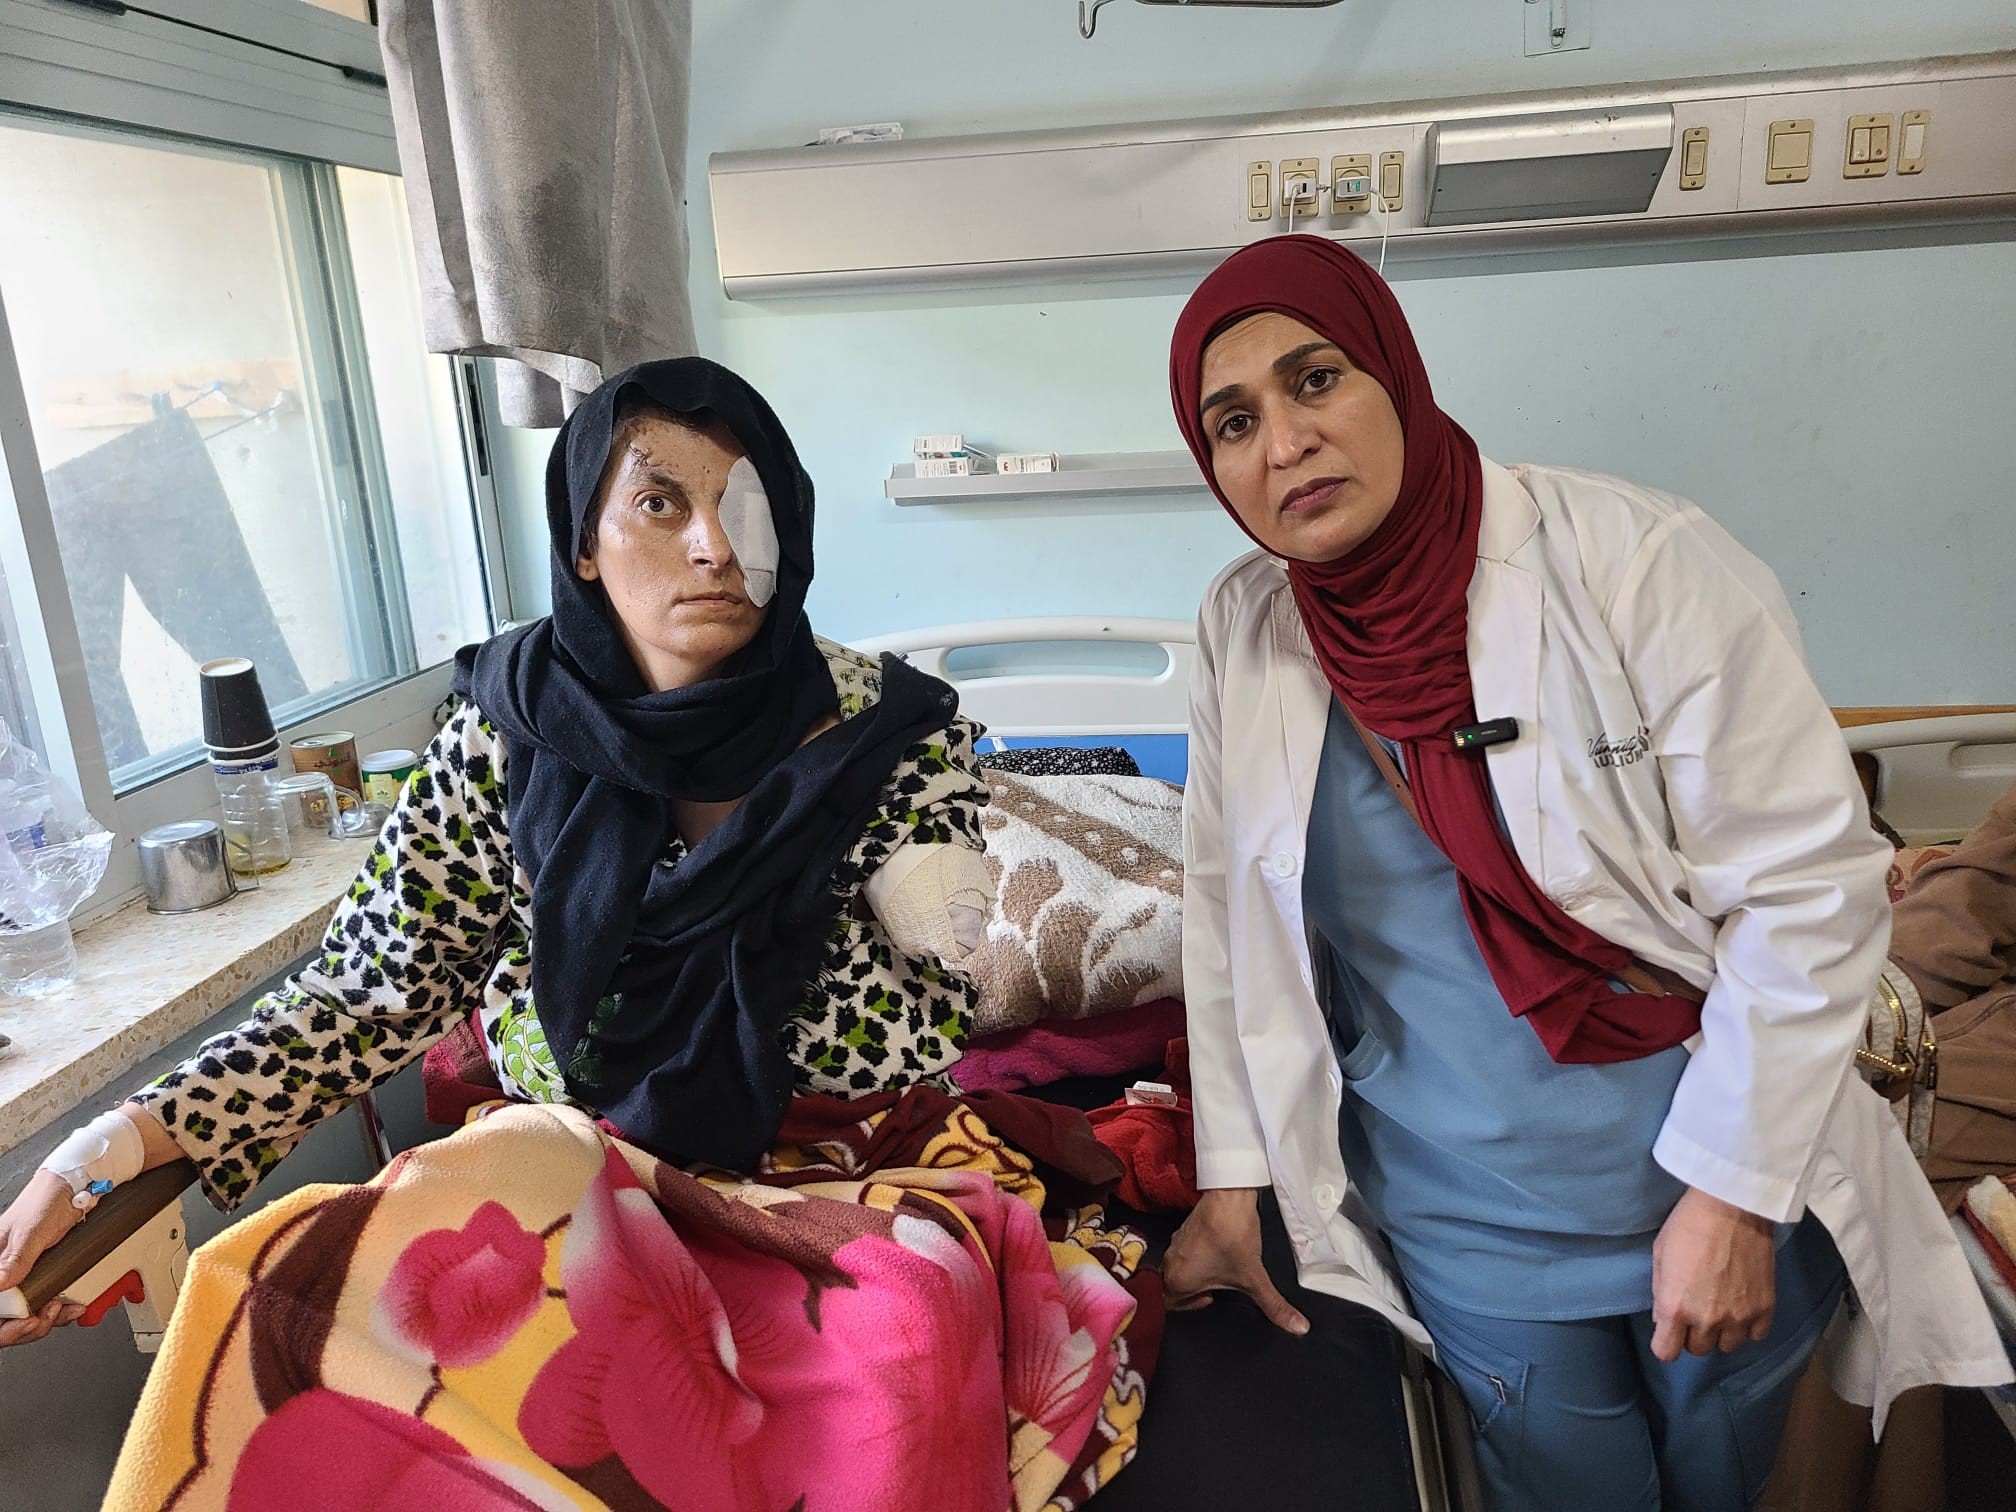 ‘Walls were shaking’: Calgary doctor’s humanitarian mission to Gaza truncated by looming danger